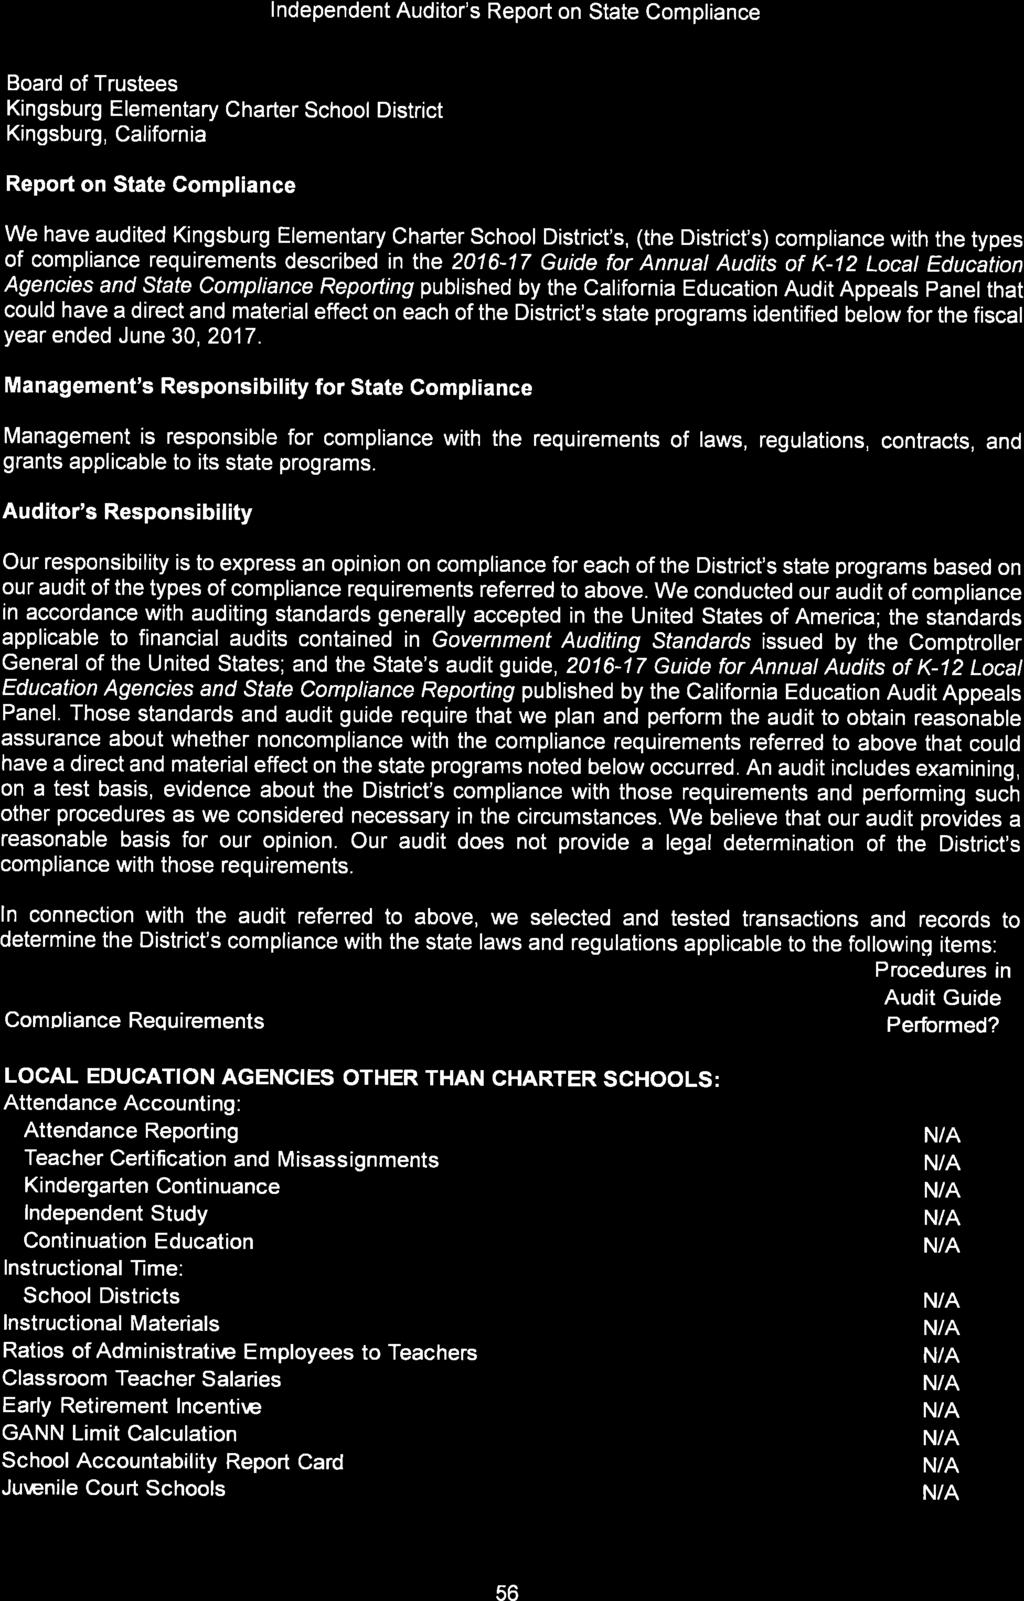 lndependent Auditor's Report on State Compliance Board of Trustees Kingsburg Elementary Charter School District Kingsburg, California Report on State Compliance We have audited Kingsburg Elementary